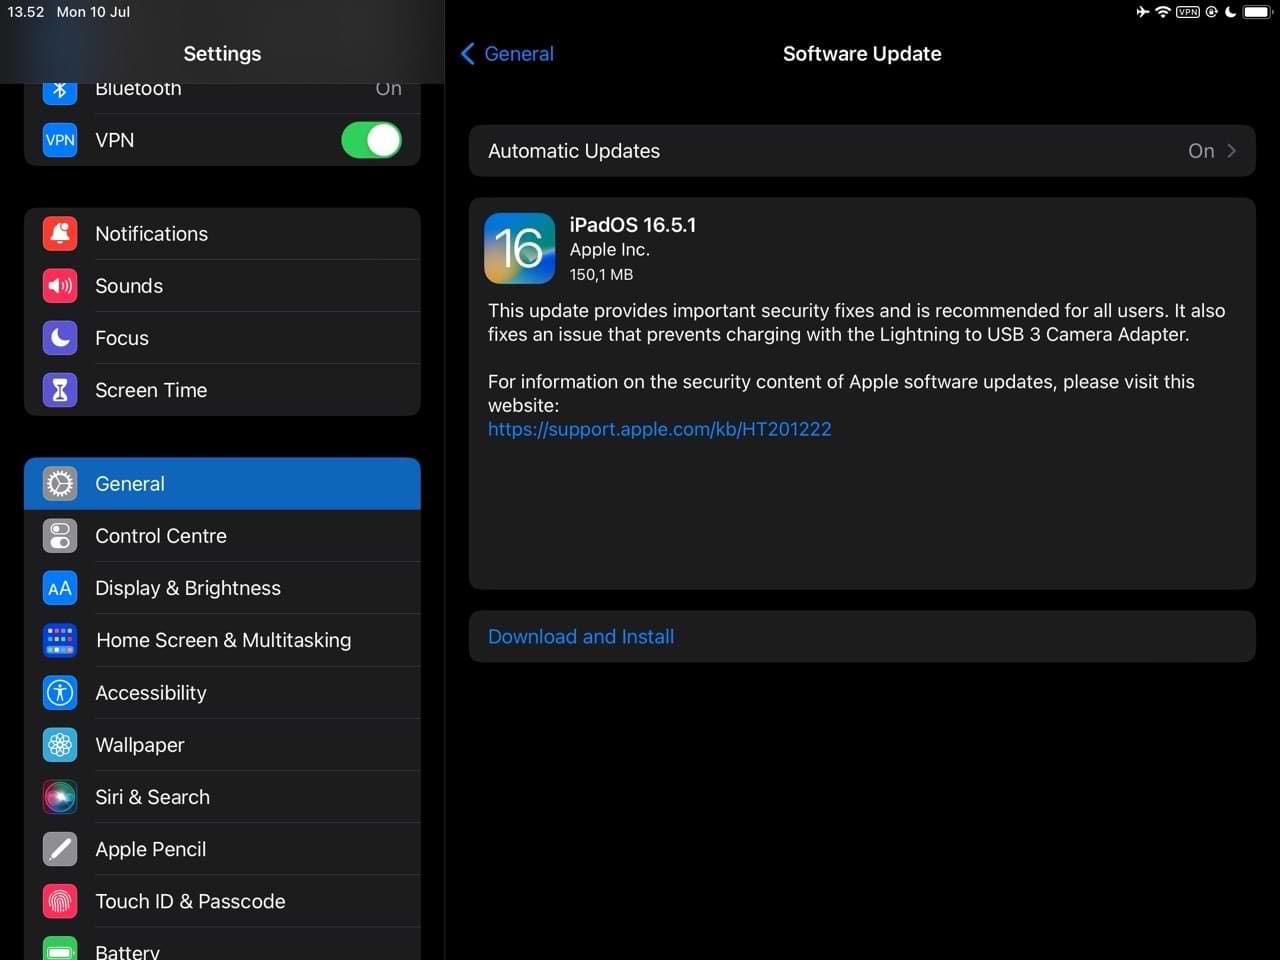 Update software on your iPad